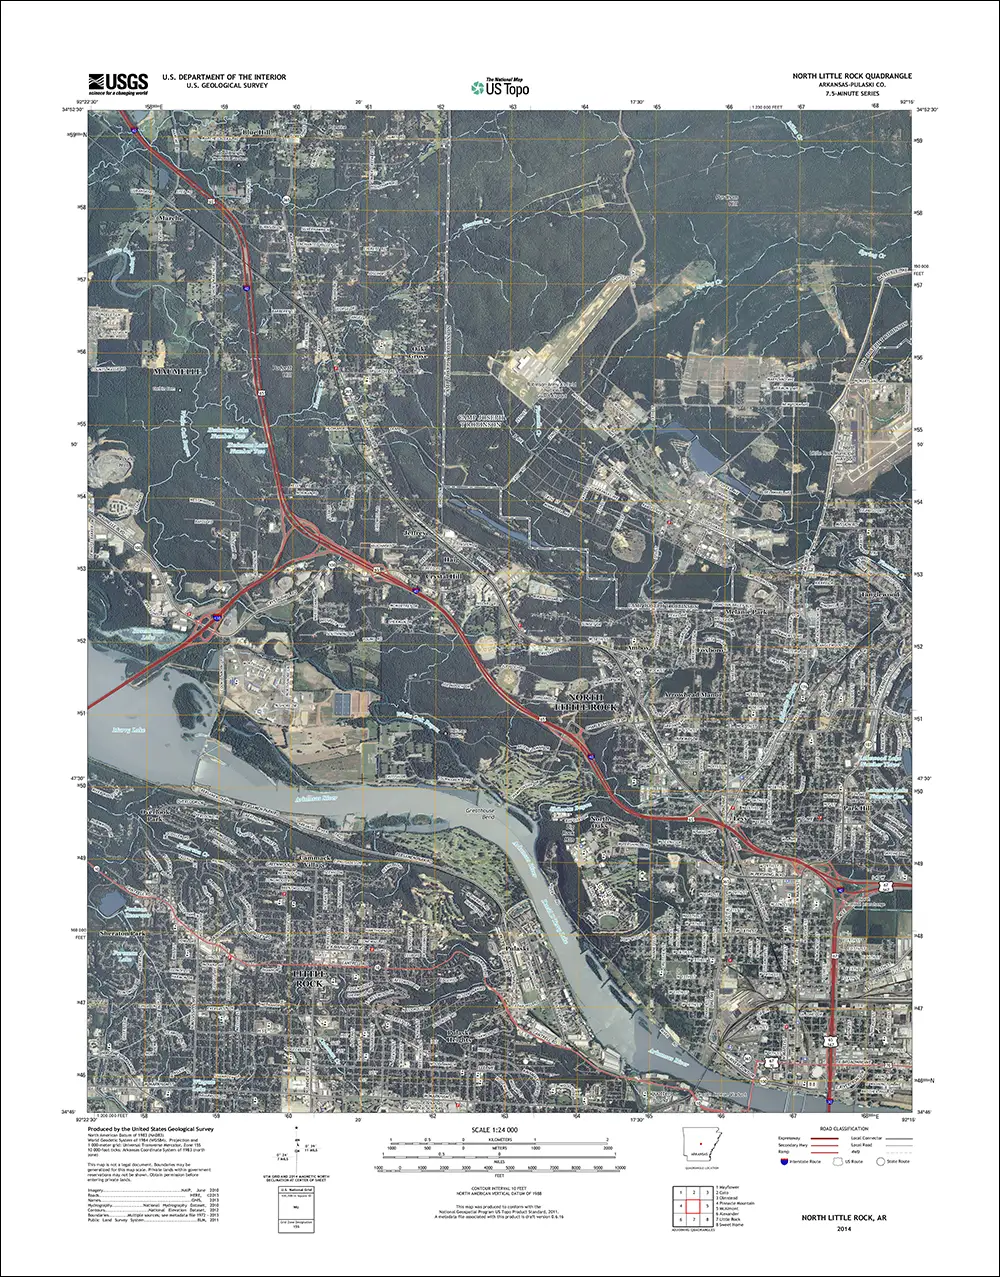 2014 US Topo map of the North Little Rock, Arkansas, area with image layer turned on (1:24,000 scale). (high resolution image 1.4 MB)